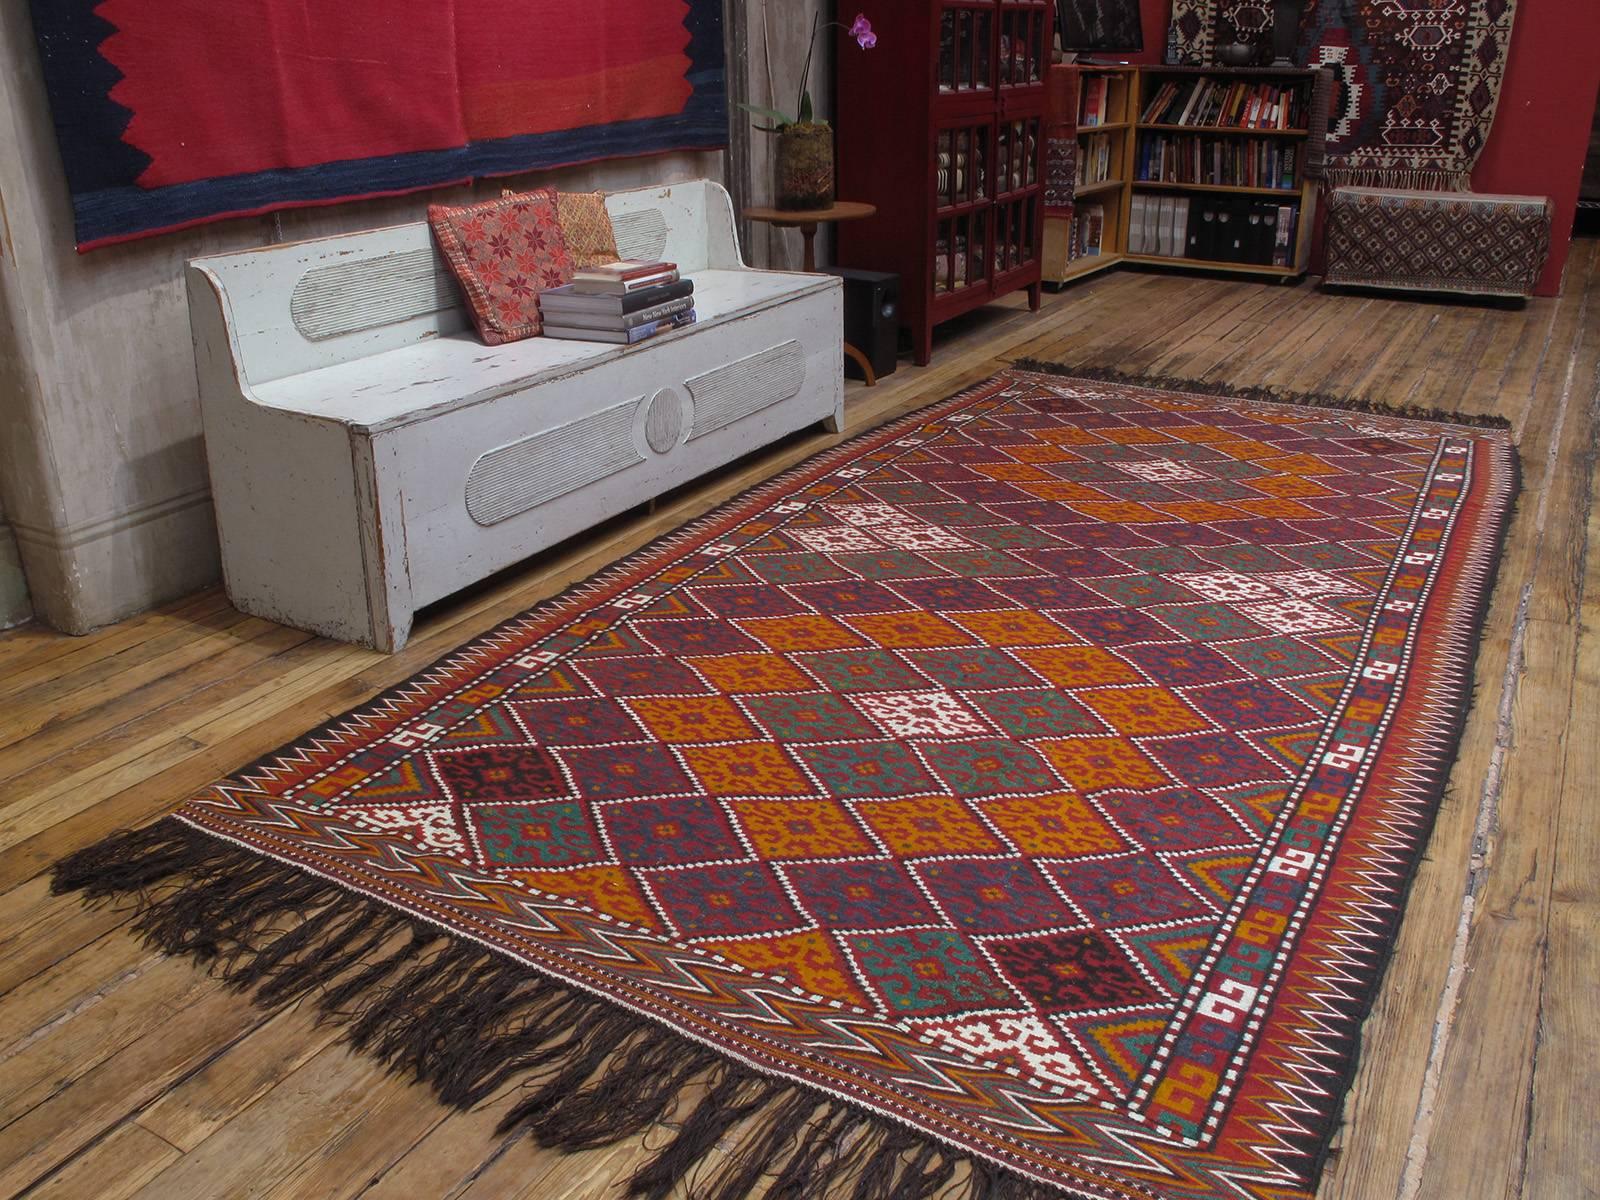 Afghan Tribal Kilim rug. An impressive tribal flat-weave rug from Northwestern Afghanistan, in characteristic wide and long format, featuring a design of concentric diamonds. The color palette is quite vibrant as the Kilims appears to have seen very